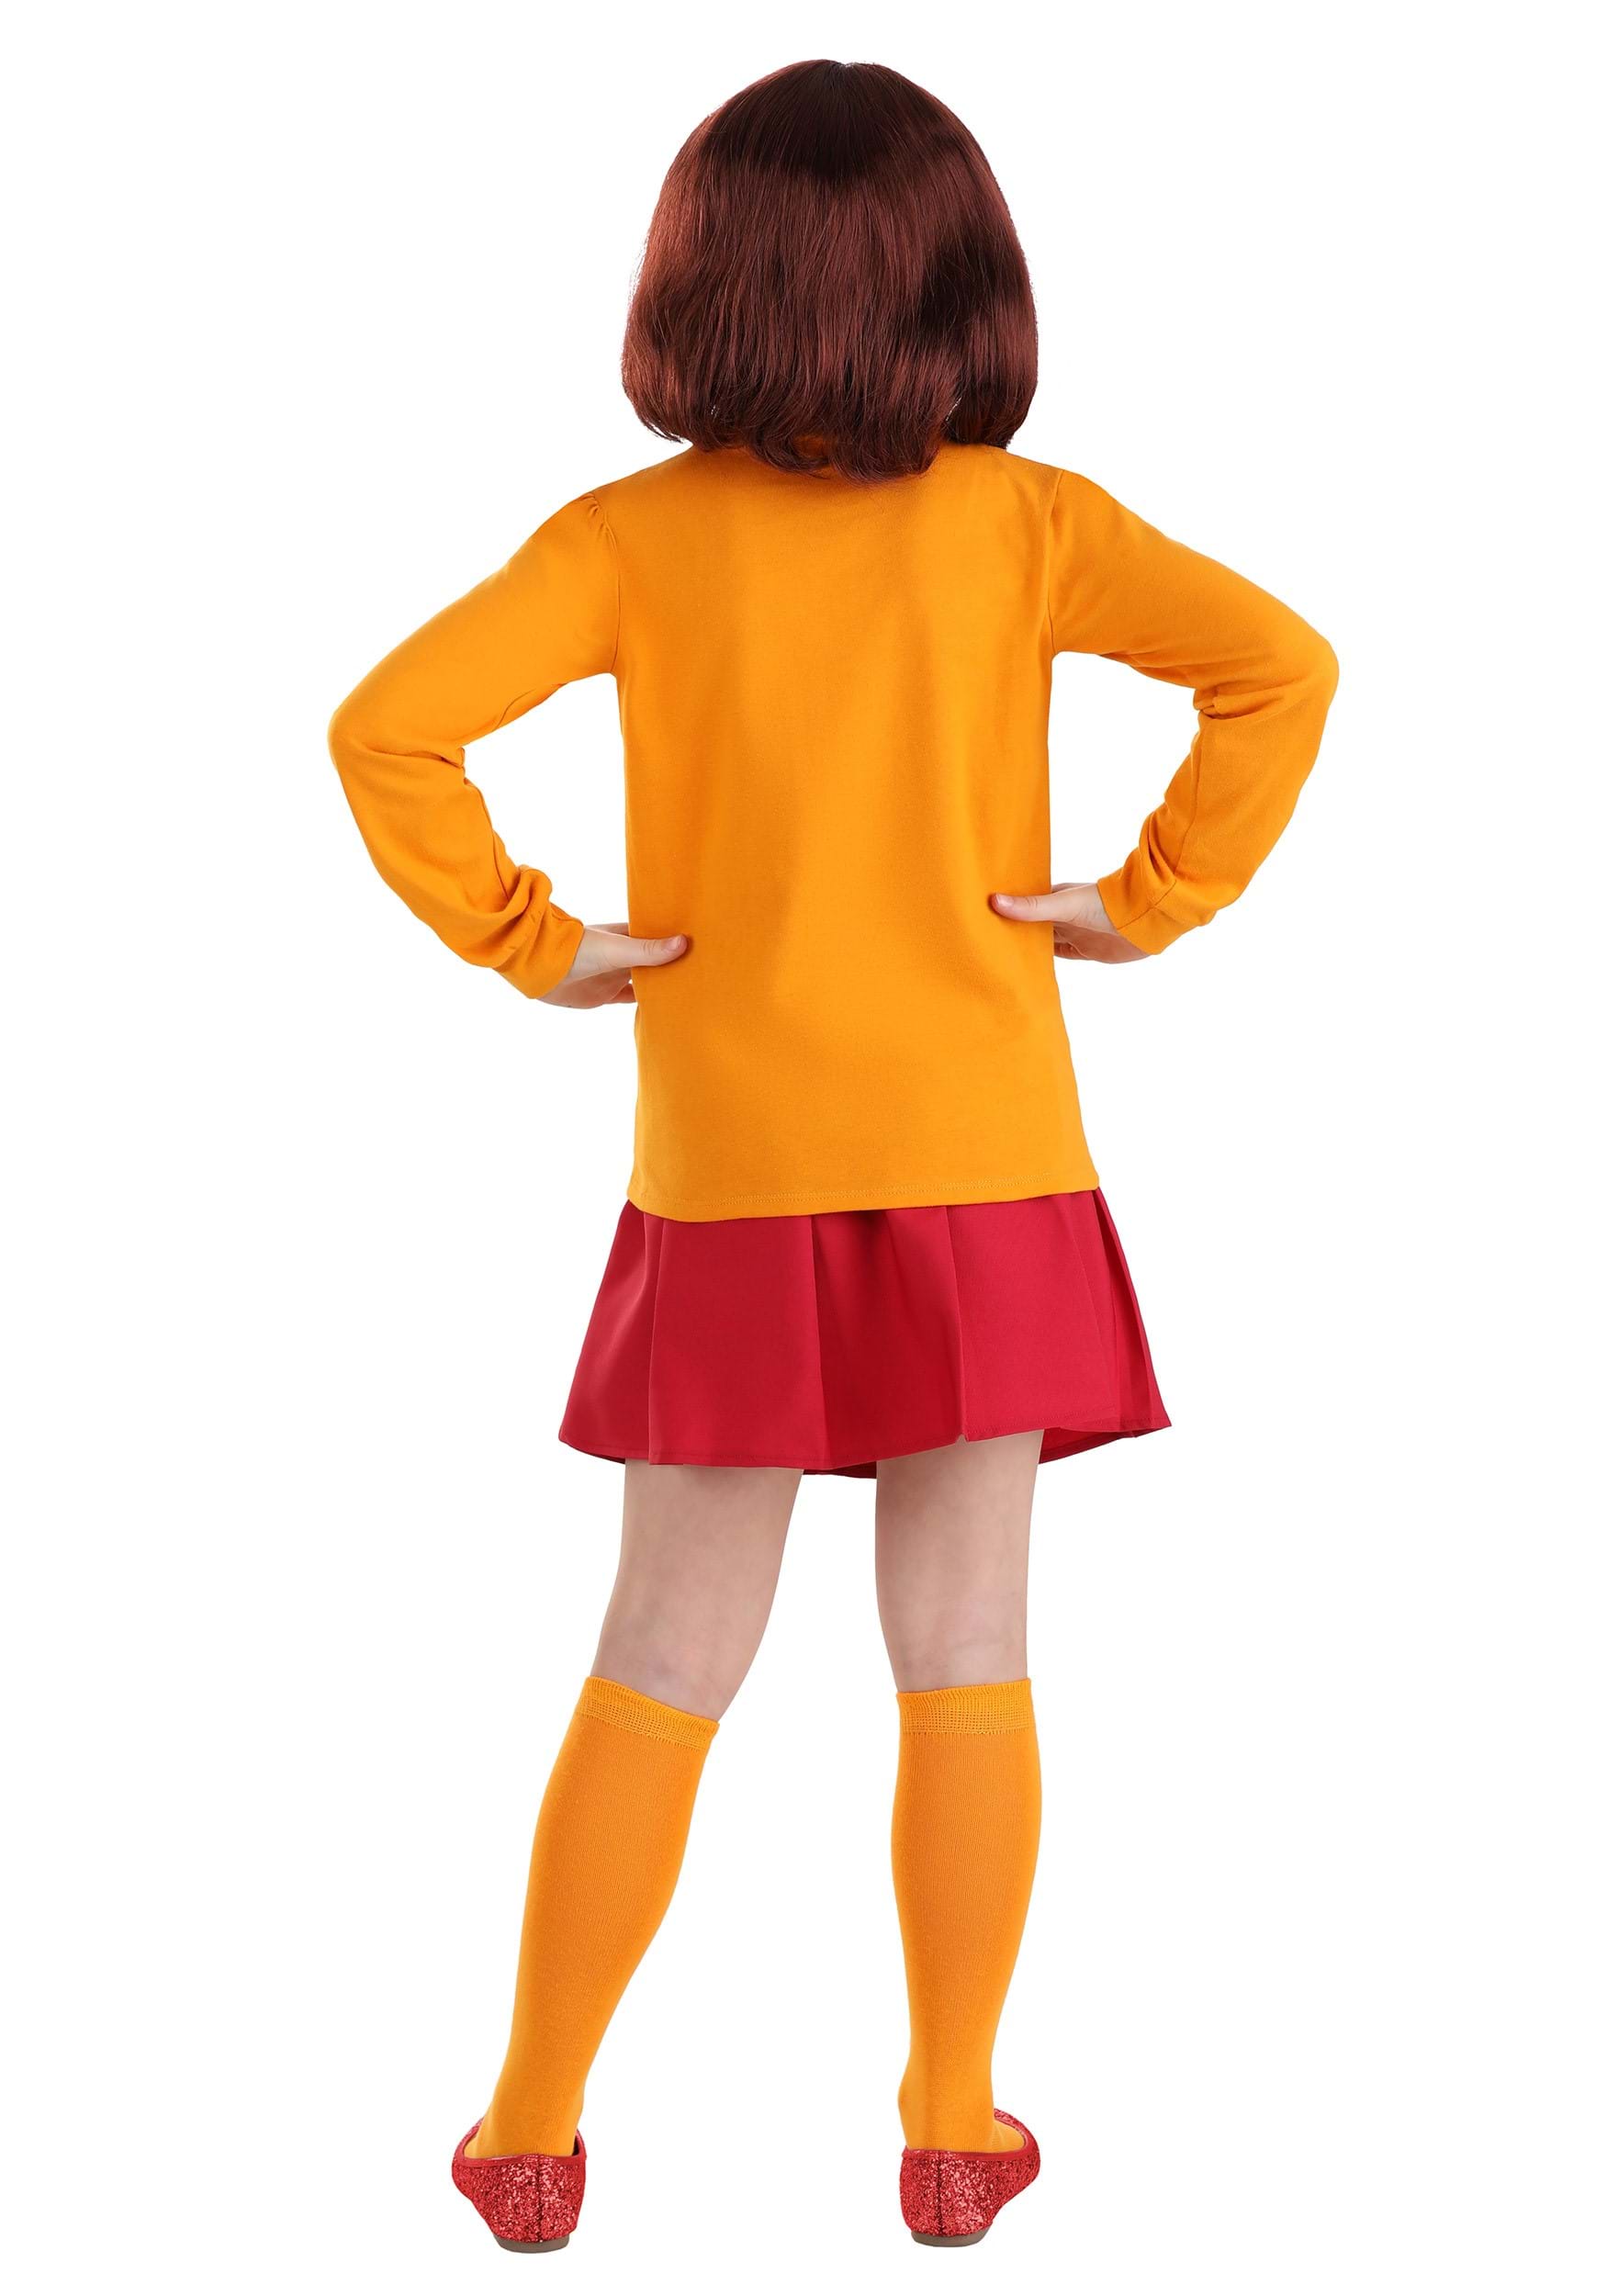 Scooby Doo Velma Costume for Toddler's